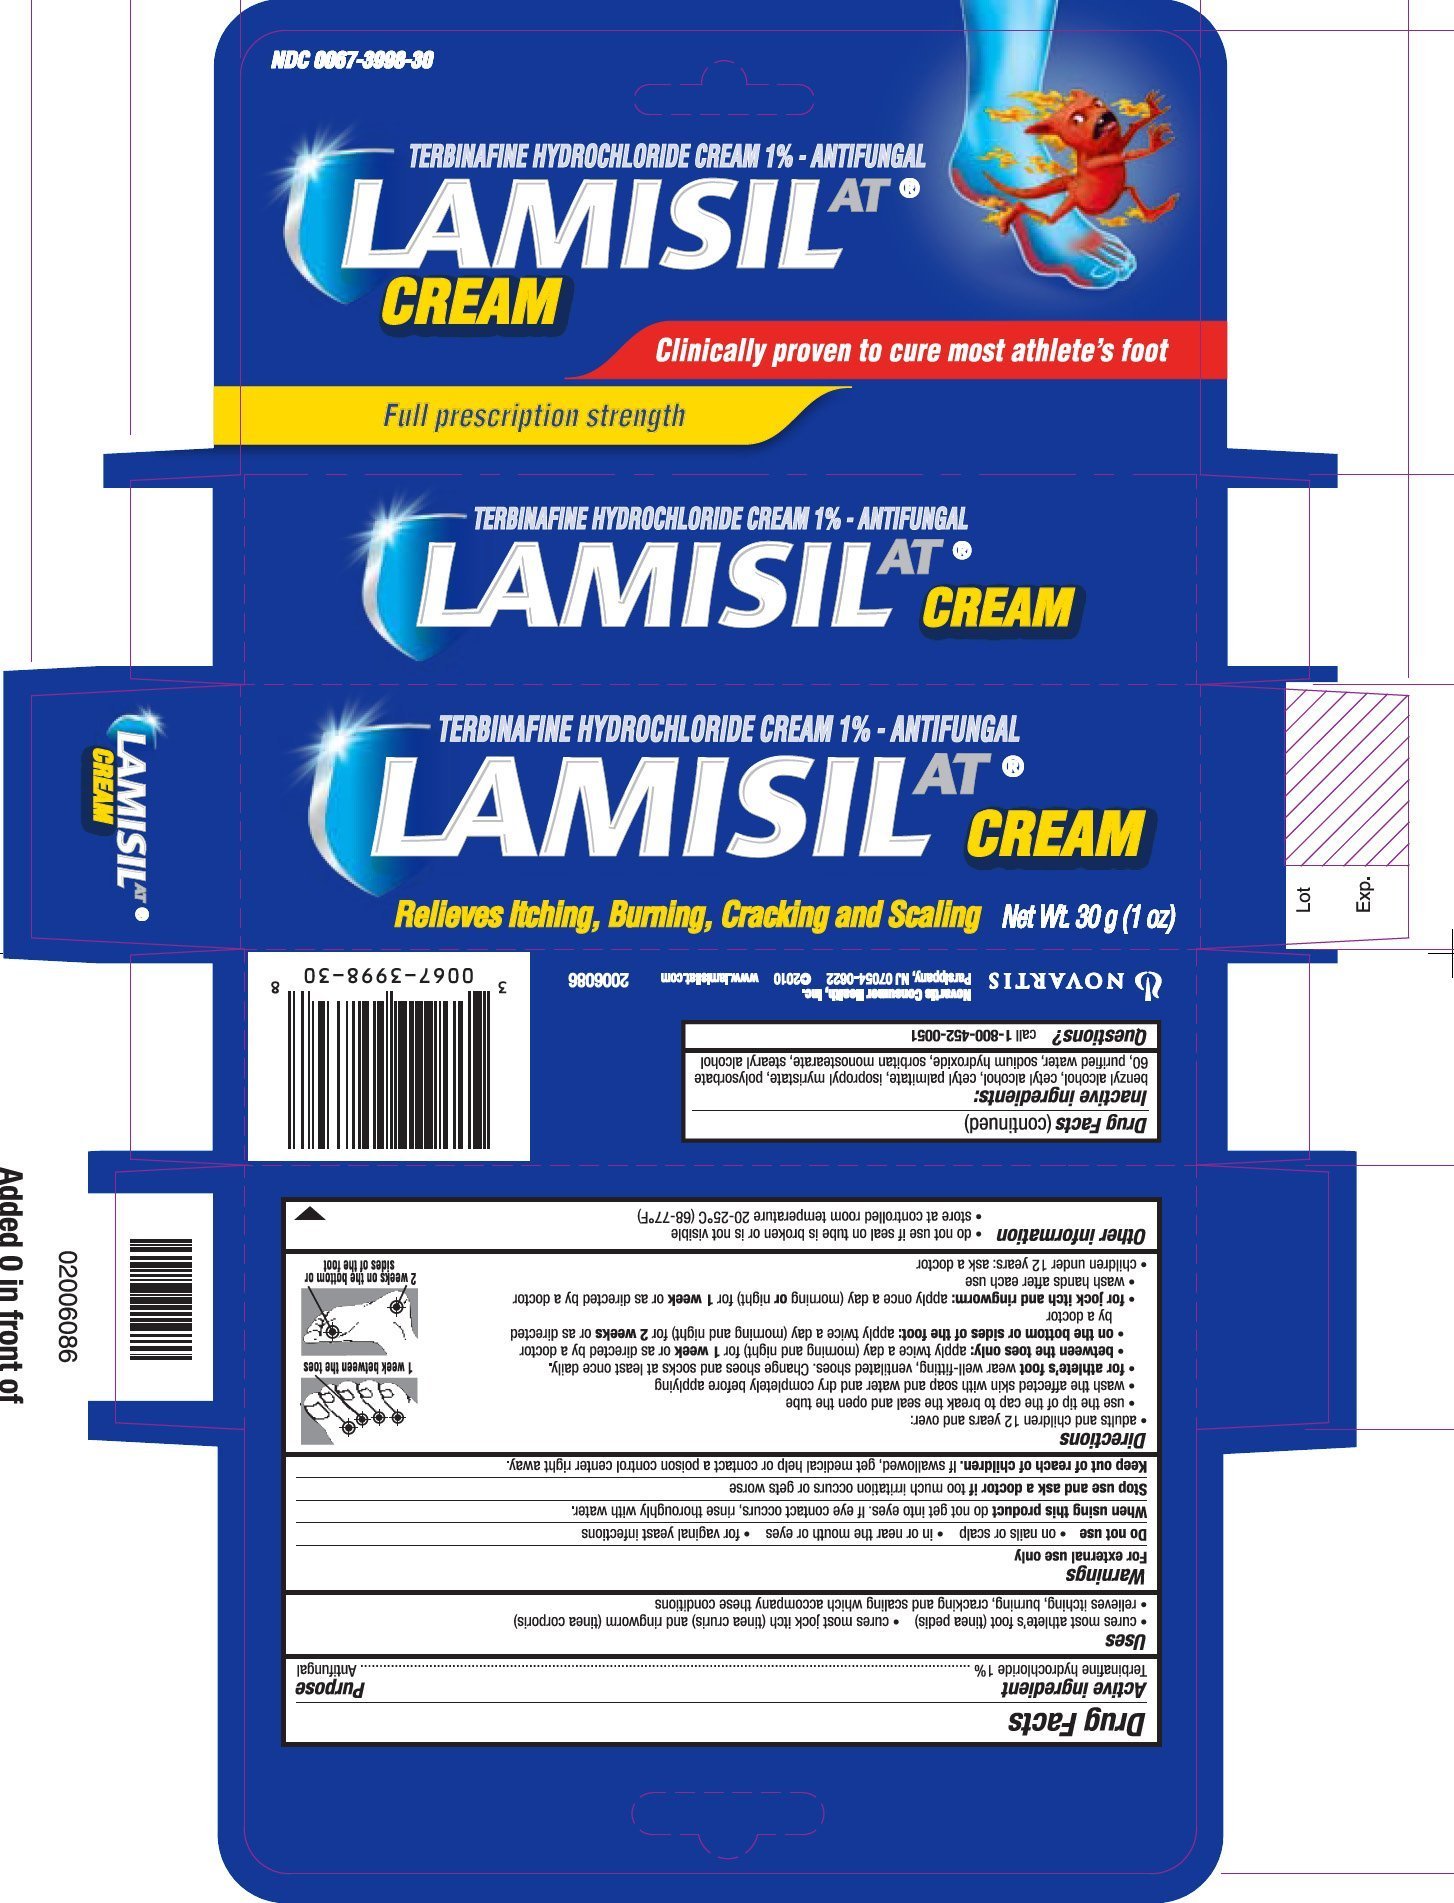 Lamisil AT Cream - FDA prescribing information, side effects and uses